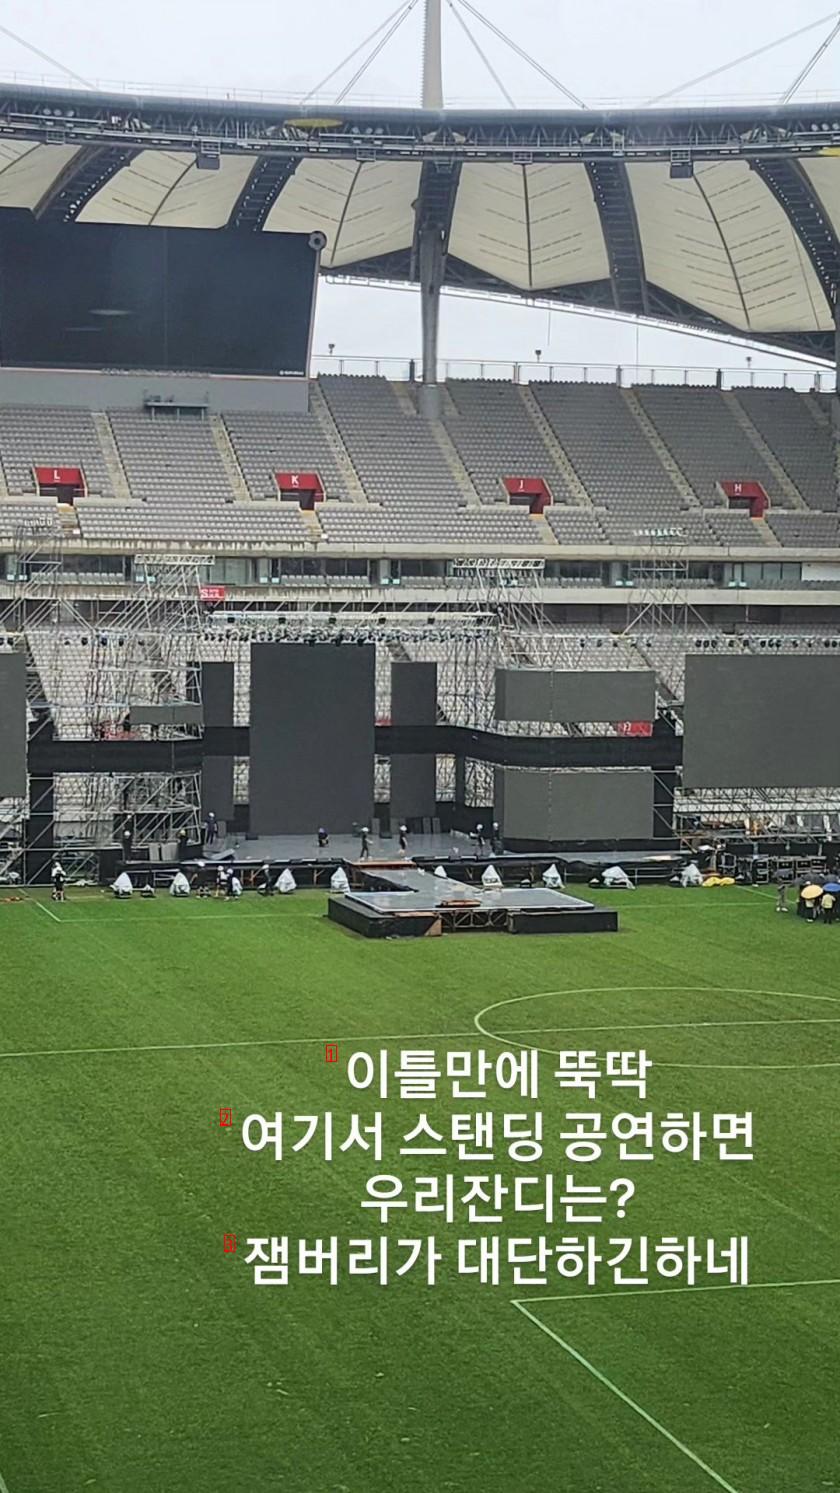 FC Seoul club employee Instagram, who seems to be shocked by Jamboree